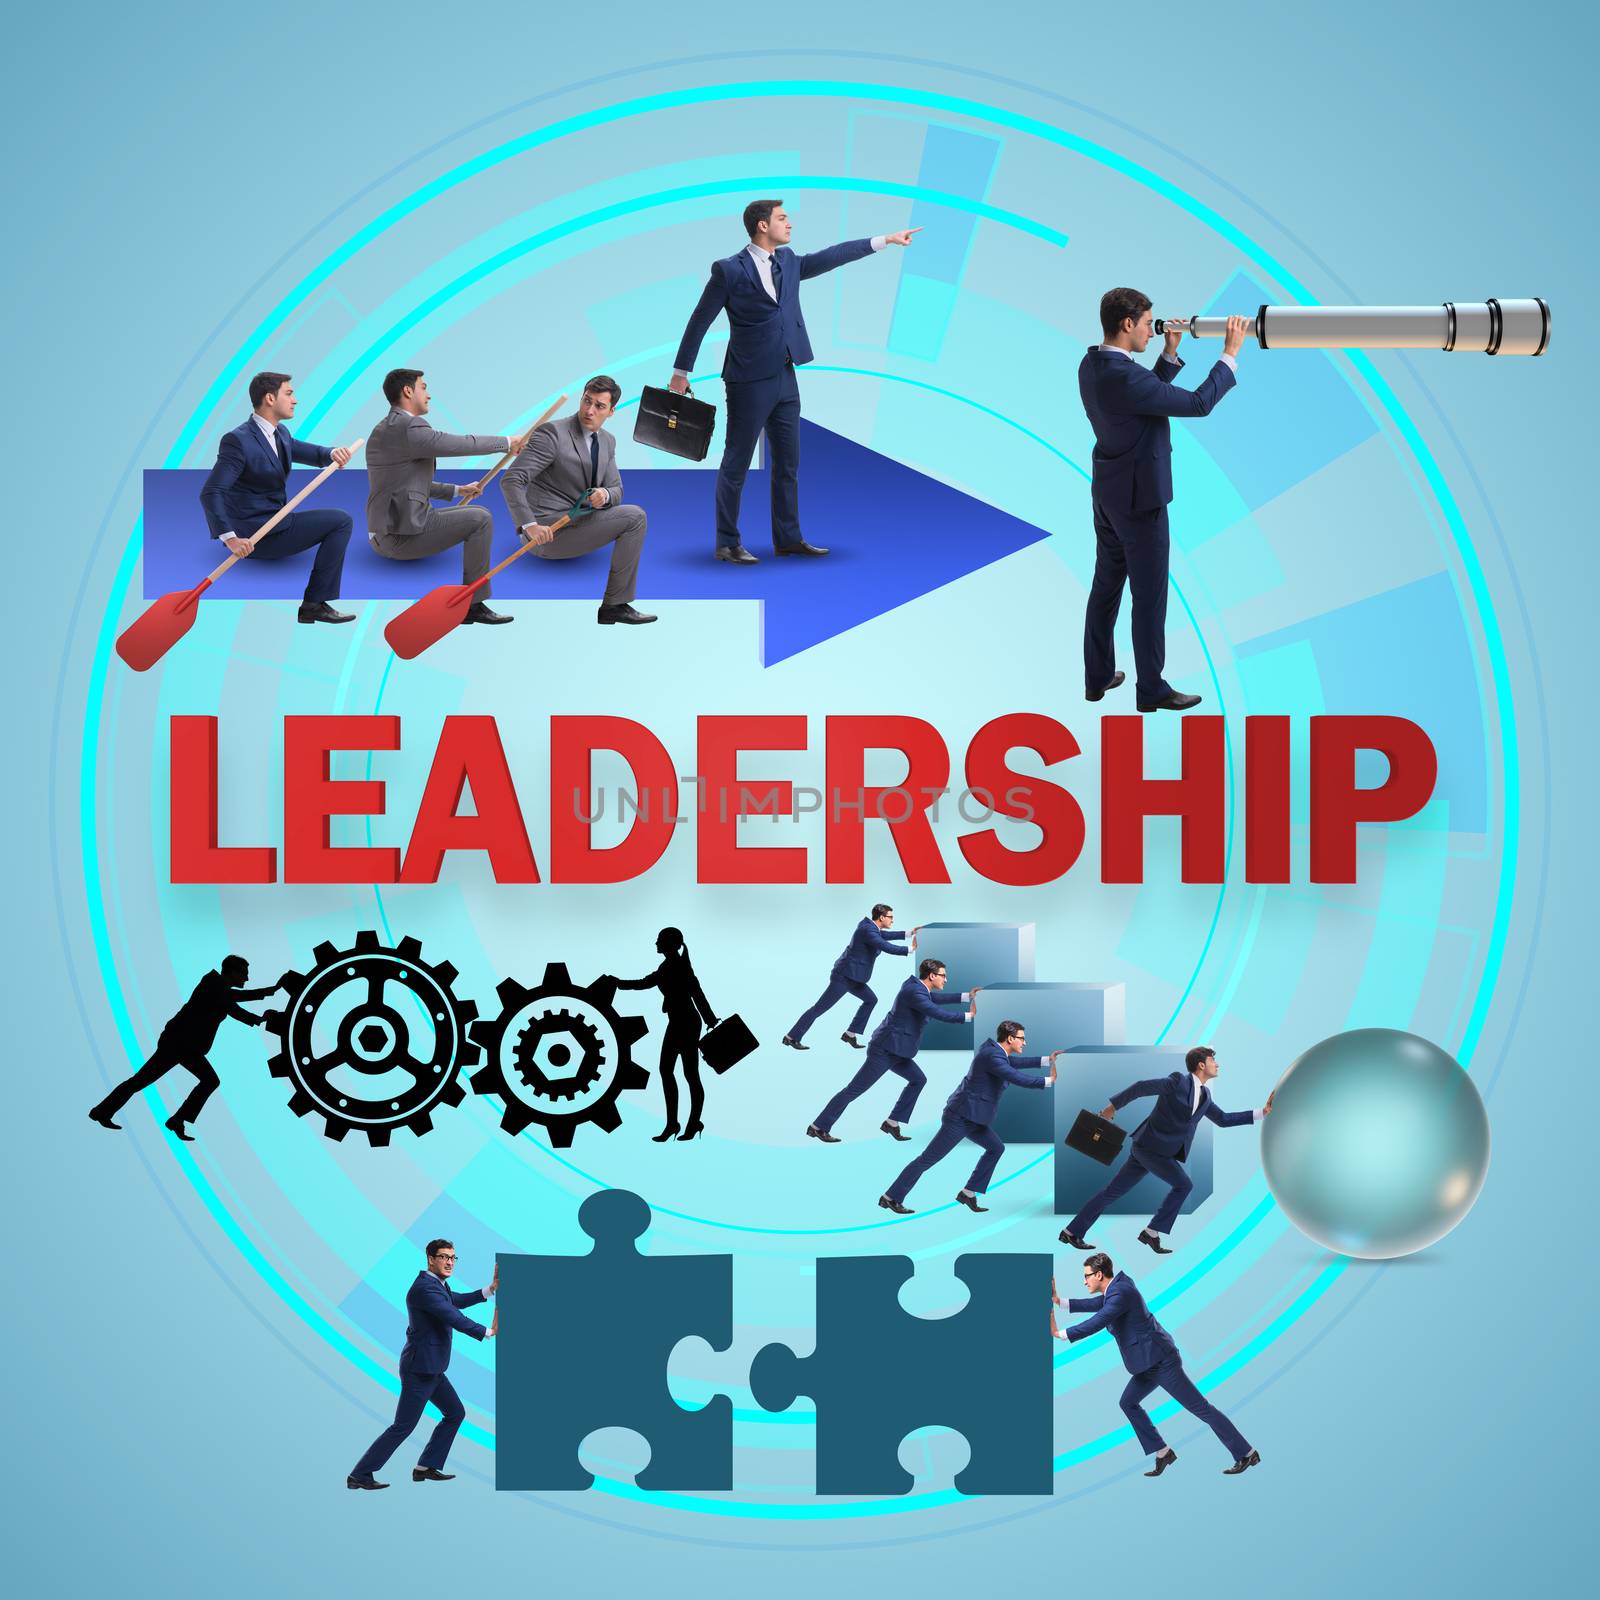 Concept of leadership with many business situations by Elnur